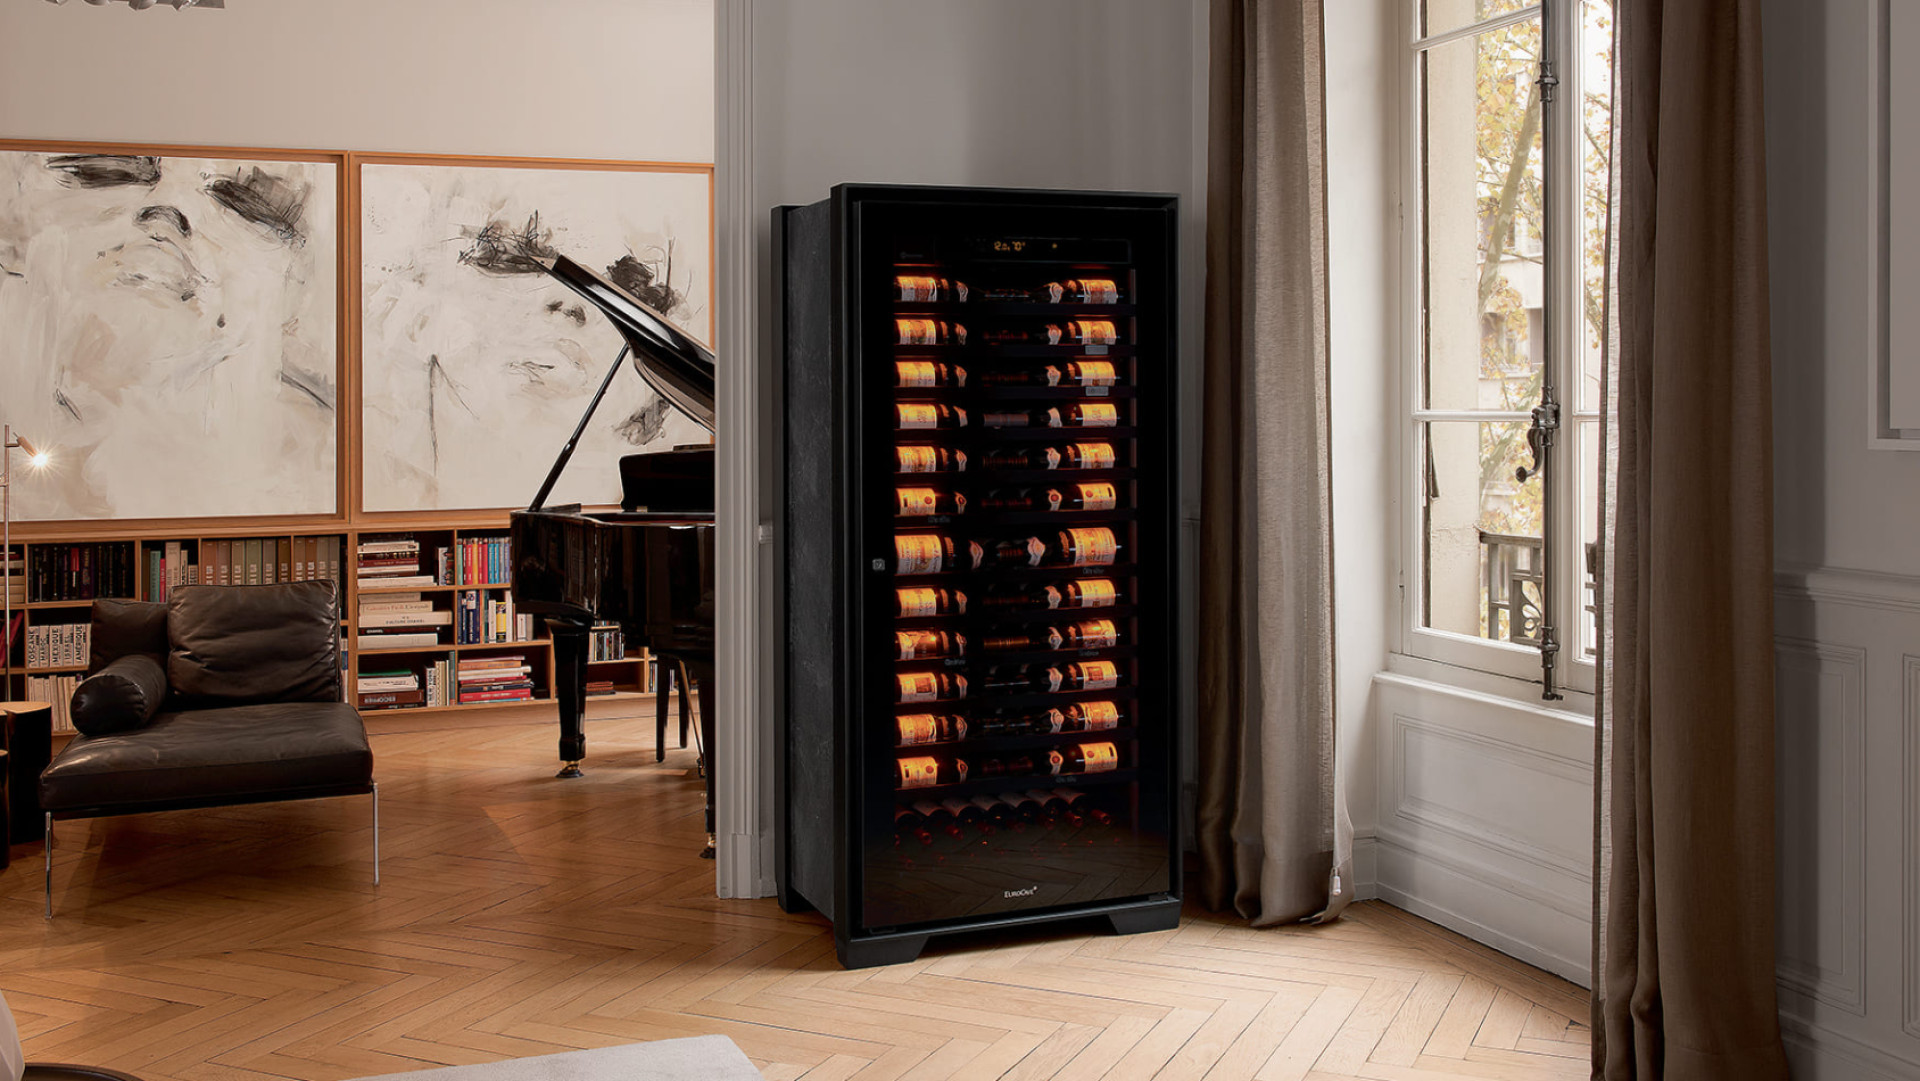 Royale aging wine cabinet installed in a musician’s living room; in the background a grand piano and paintings. – EuroCave